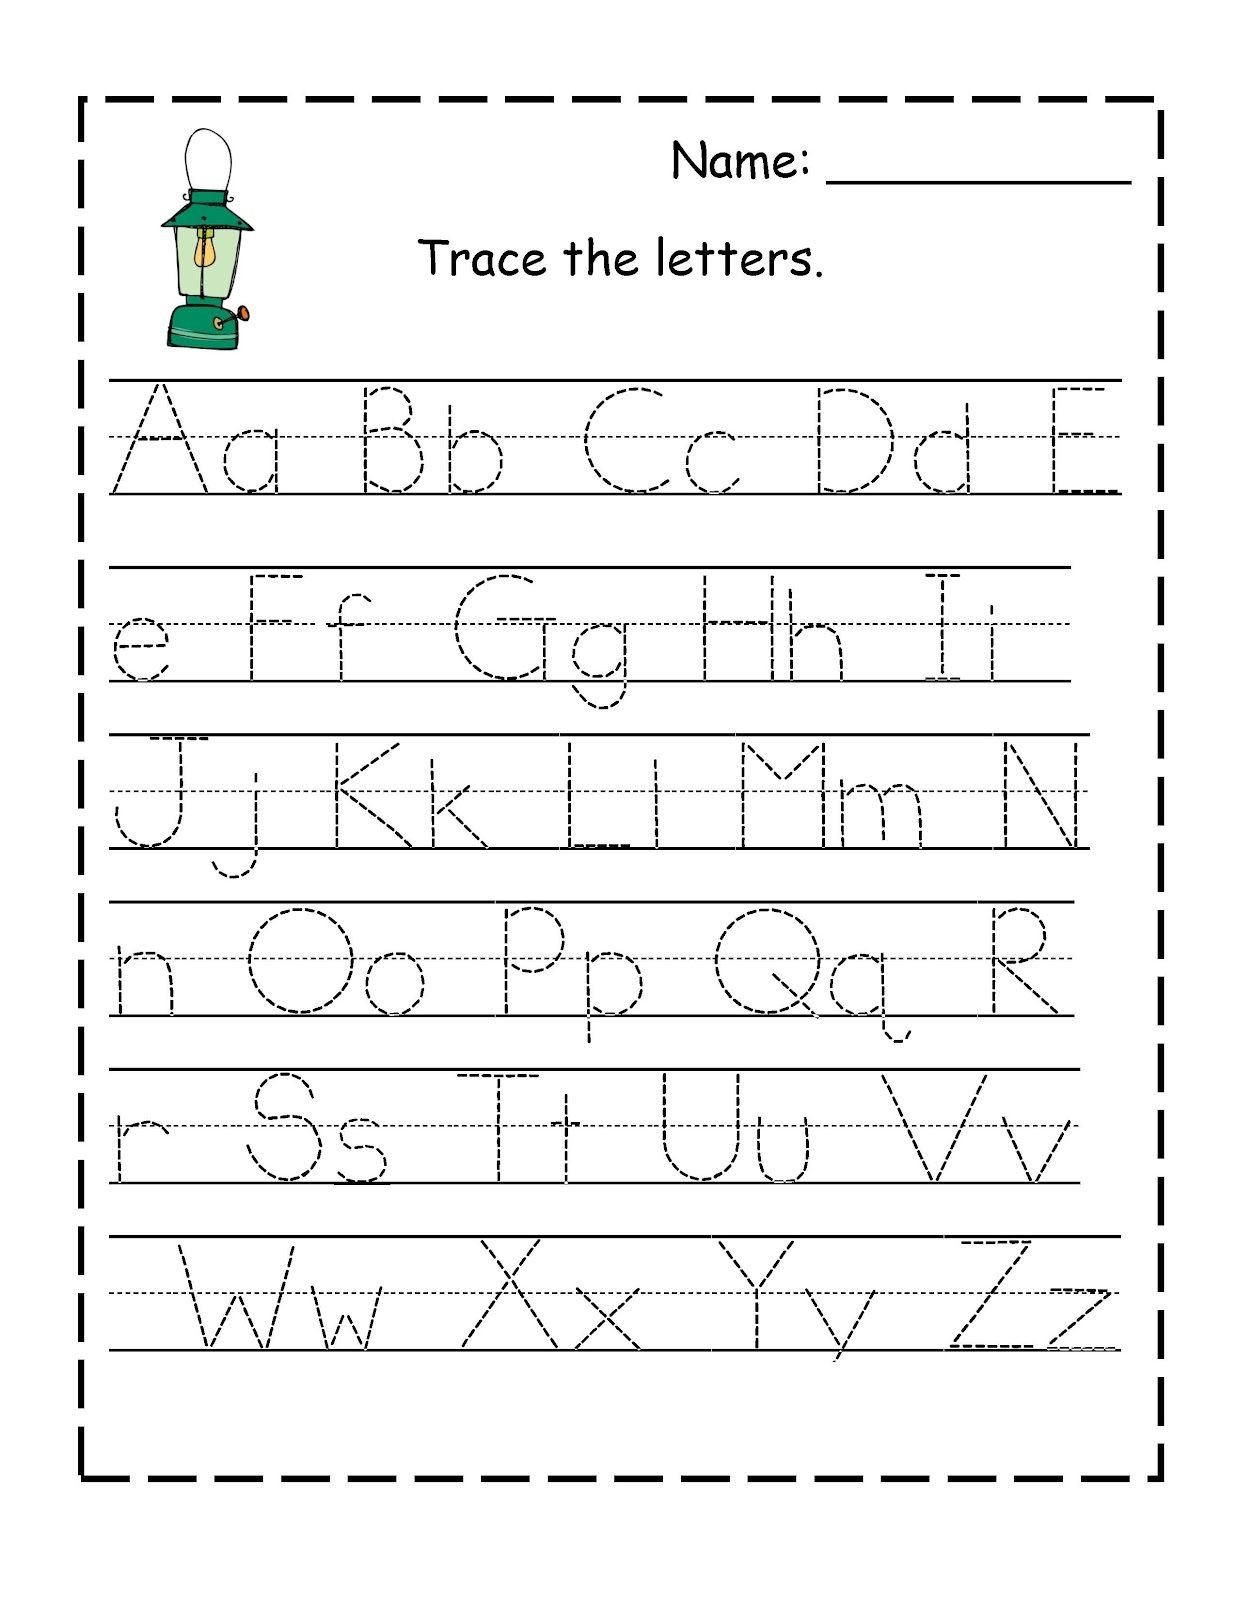 Printable Abc Worksheets Free | Activity Shelter In 2020 with Alphabet Handwriting Worksheets Free